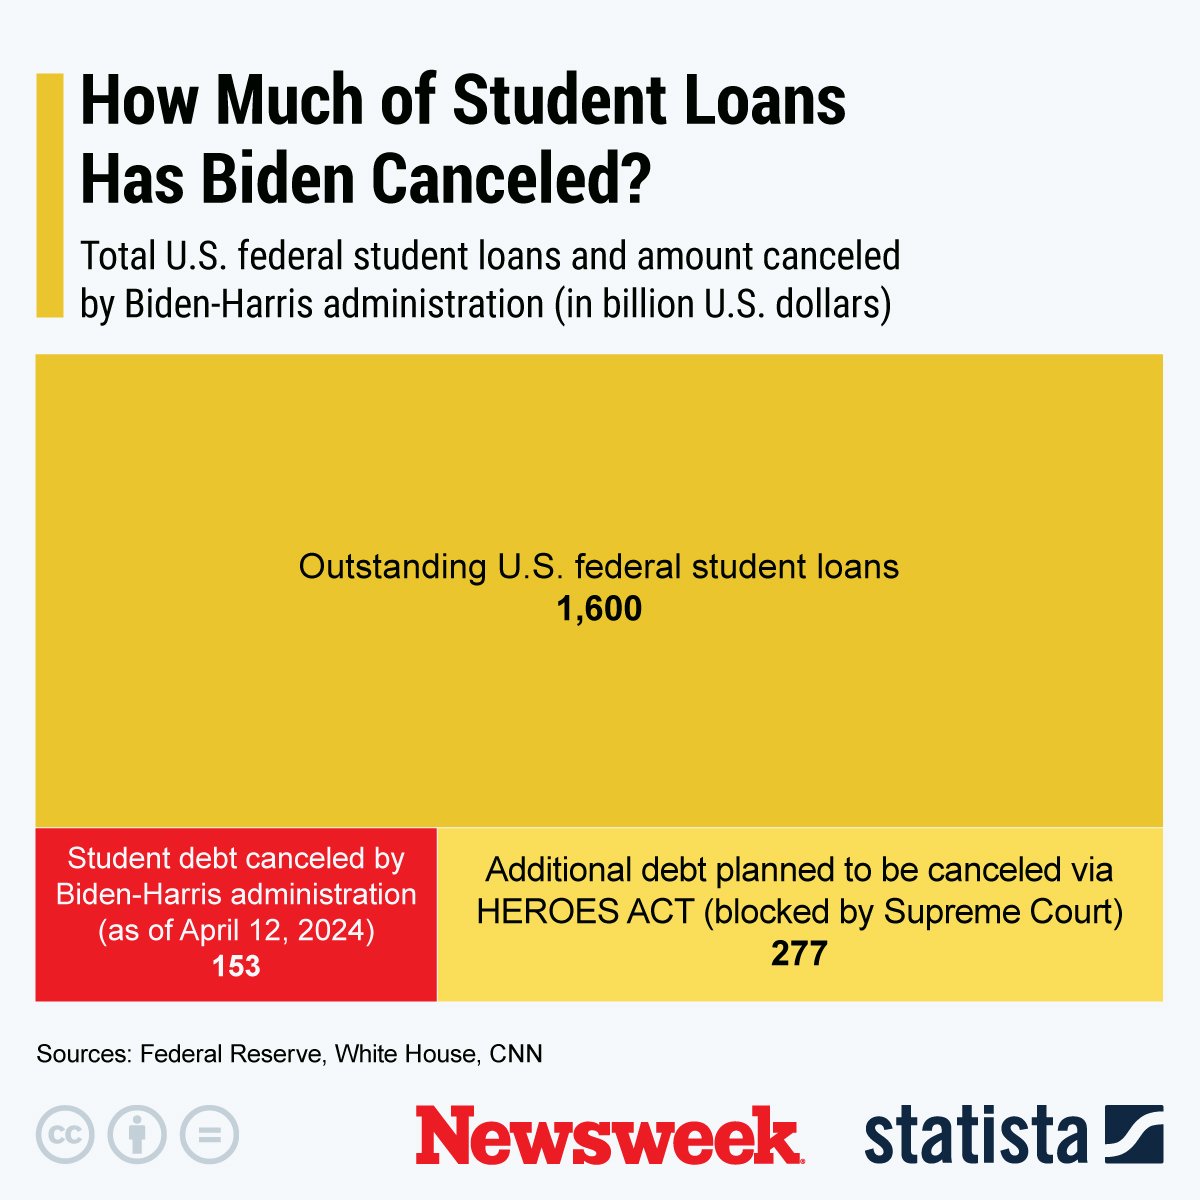 How Much of Student Loans Has Biden